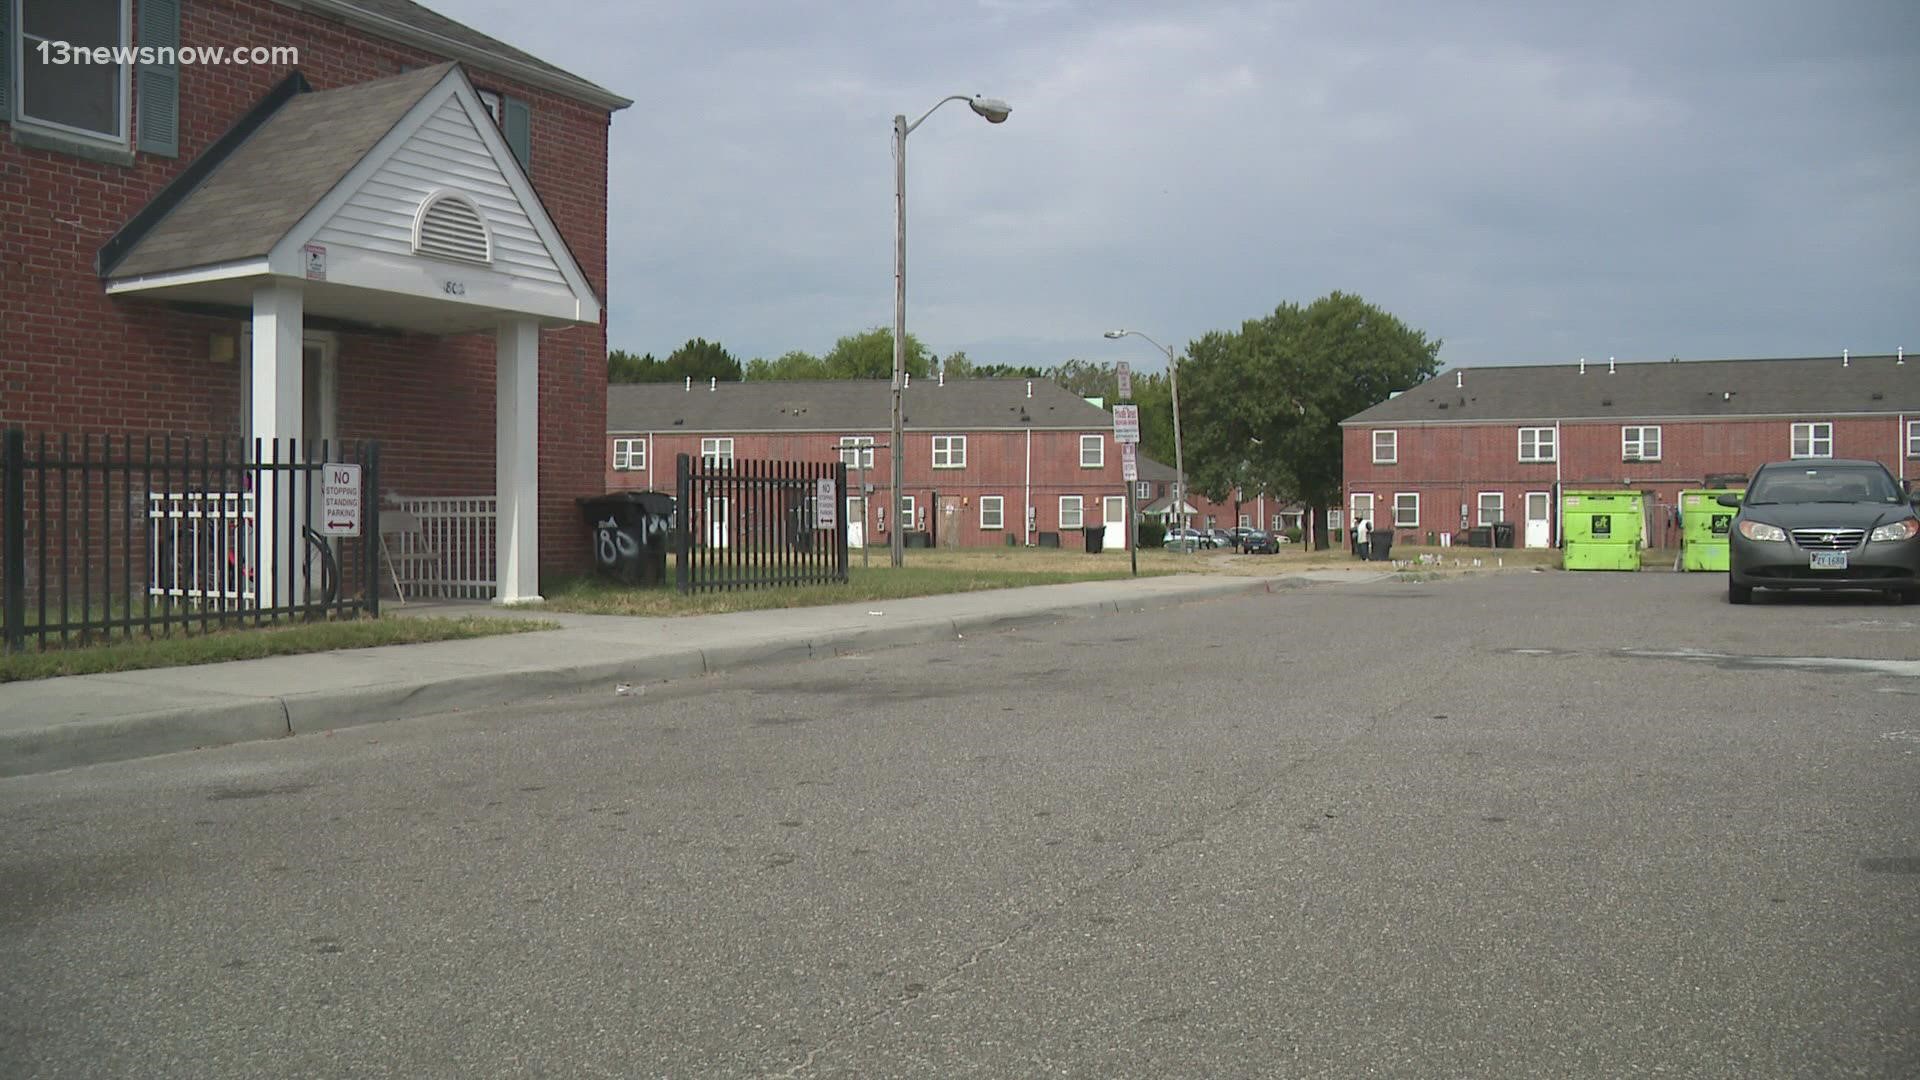 Two teens were shot in Portsmouth on Friday as the violence in the area continues.